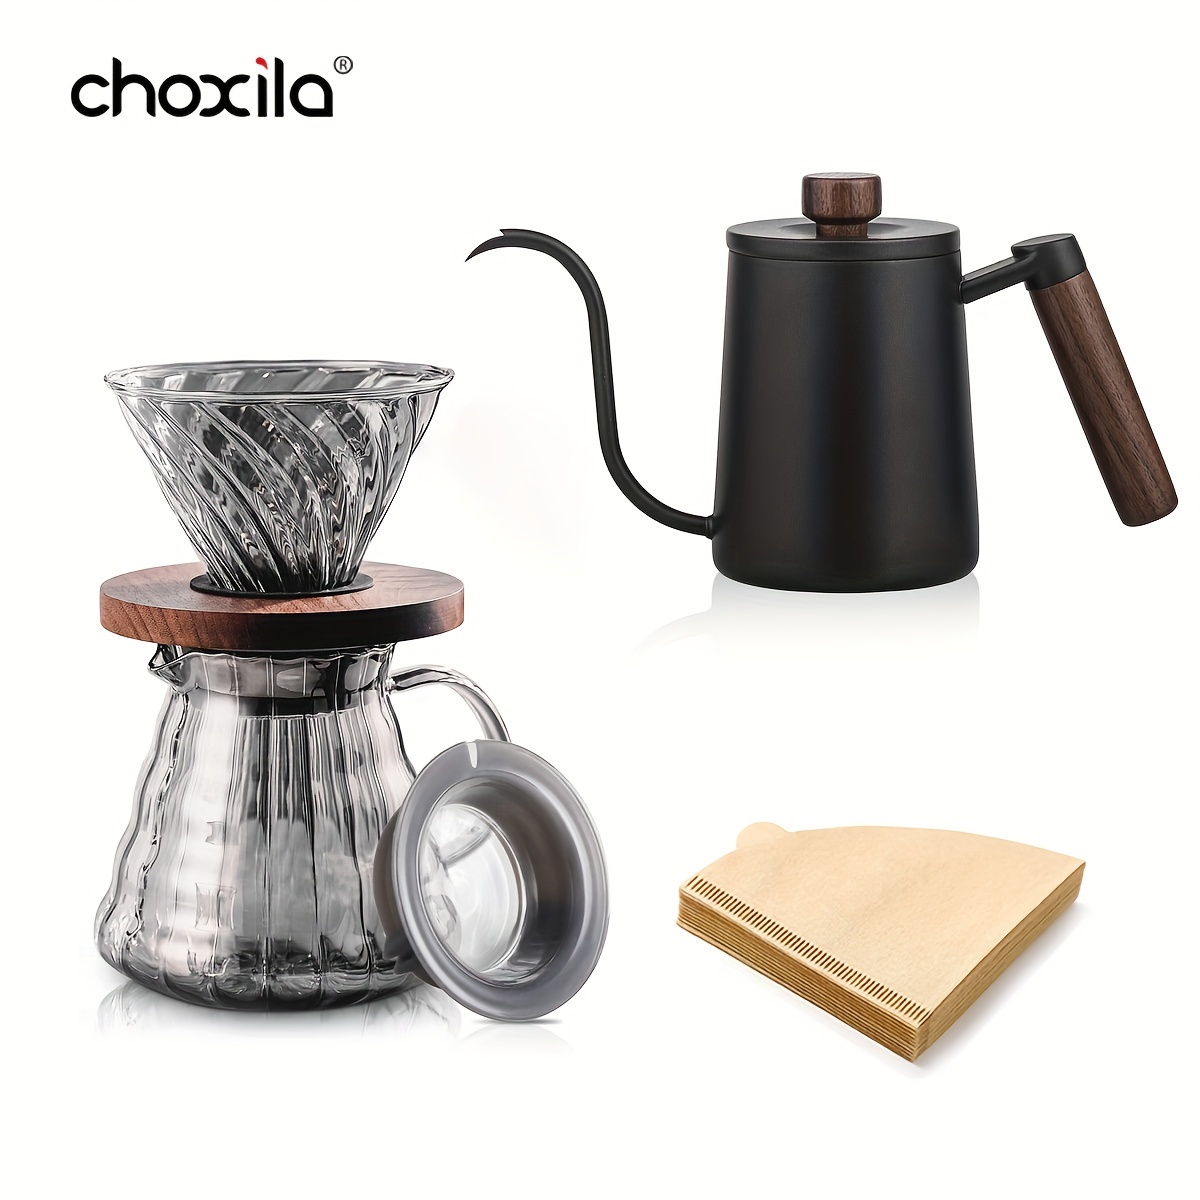 Pour Over Coffee Maker Portable Outdoor Travel Coffee Set Gift Box with  Steel Kettle Manual Grinder Glass Cup Filter Paper